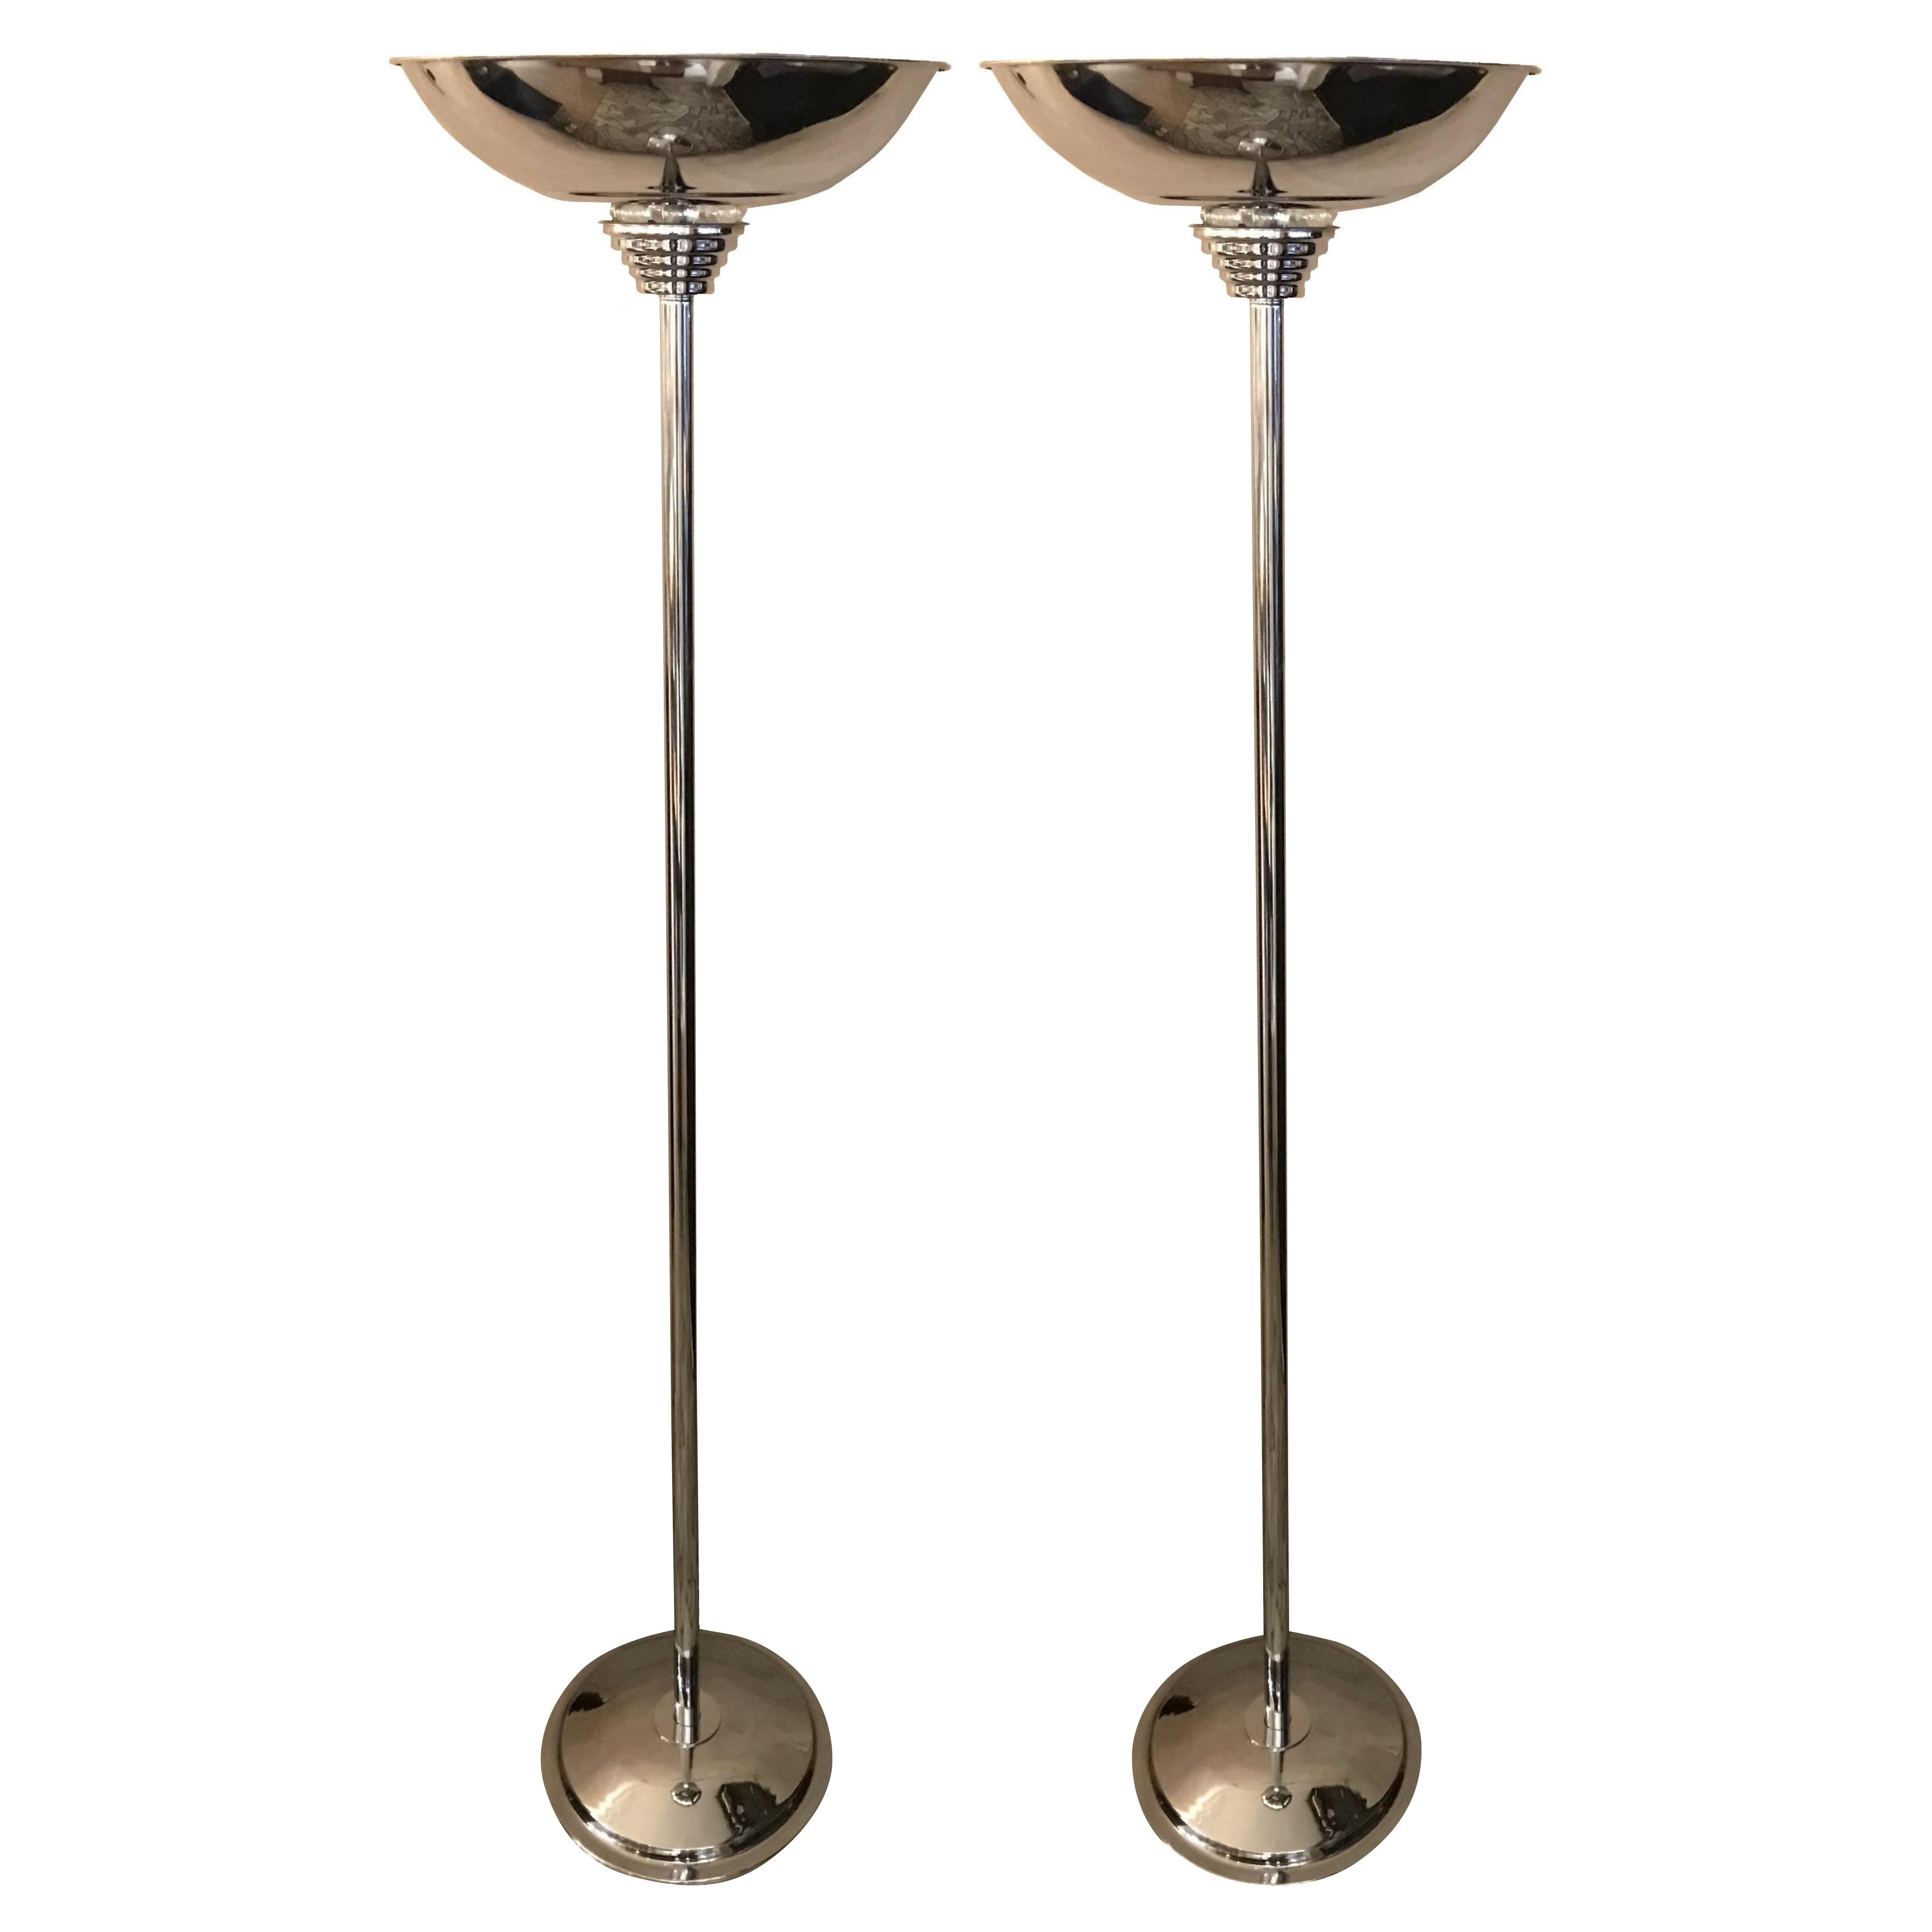 Pair of Art Deco Floor Lamp Staggere, France, Materials: Glass and Chrome, 1930 For Sale